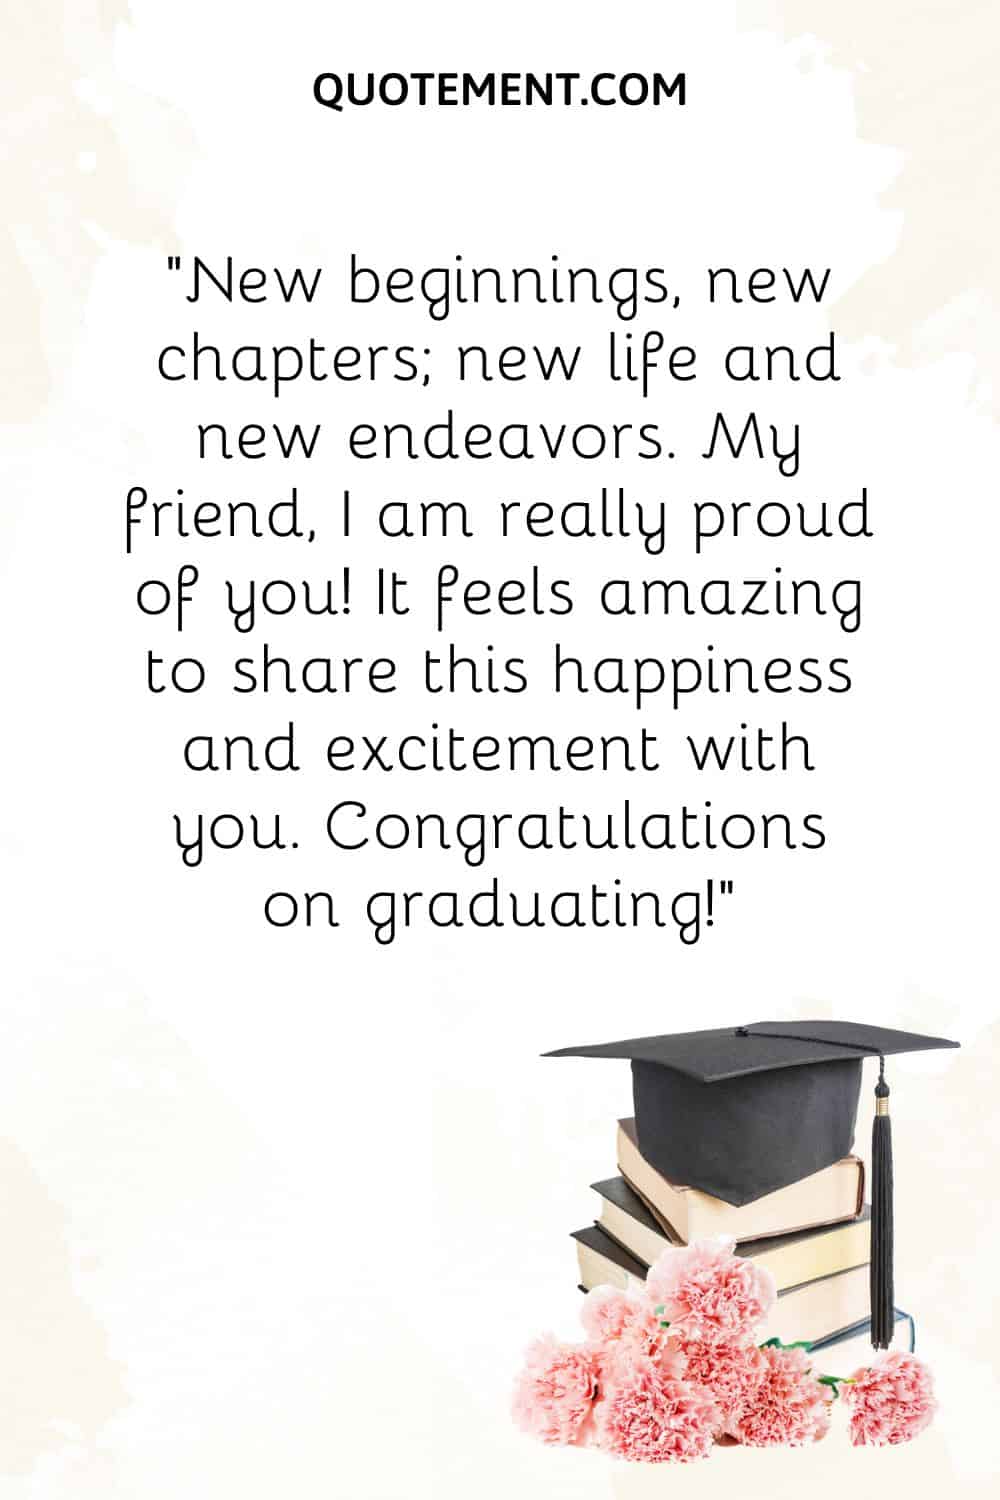 Best graduation wish for friend and graduation hat on books.